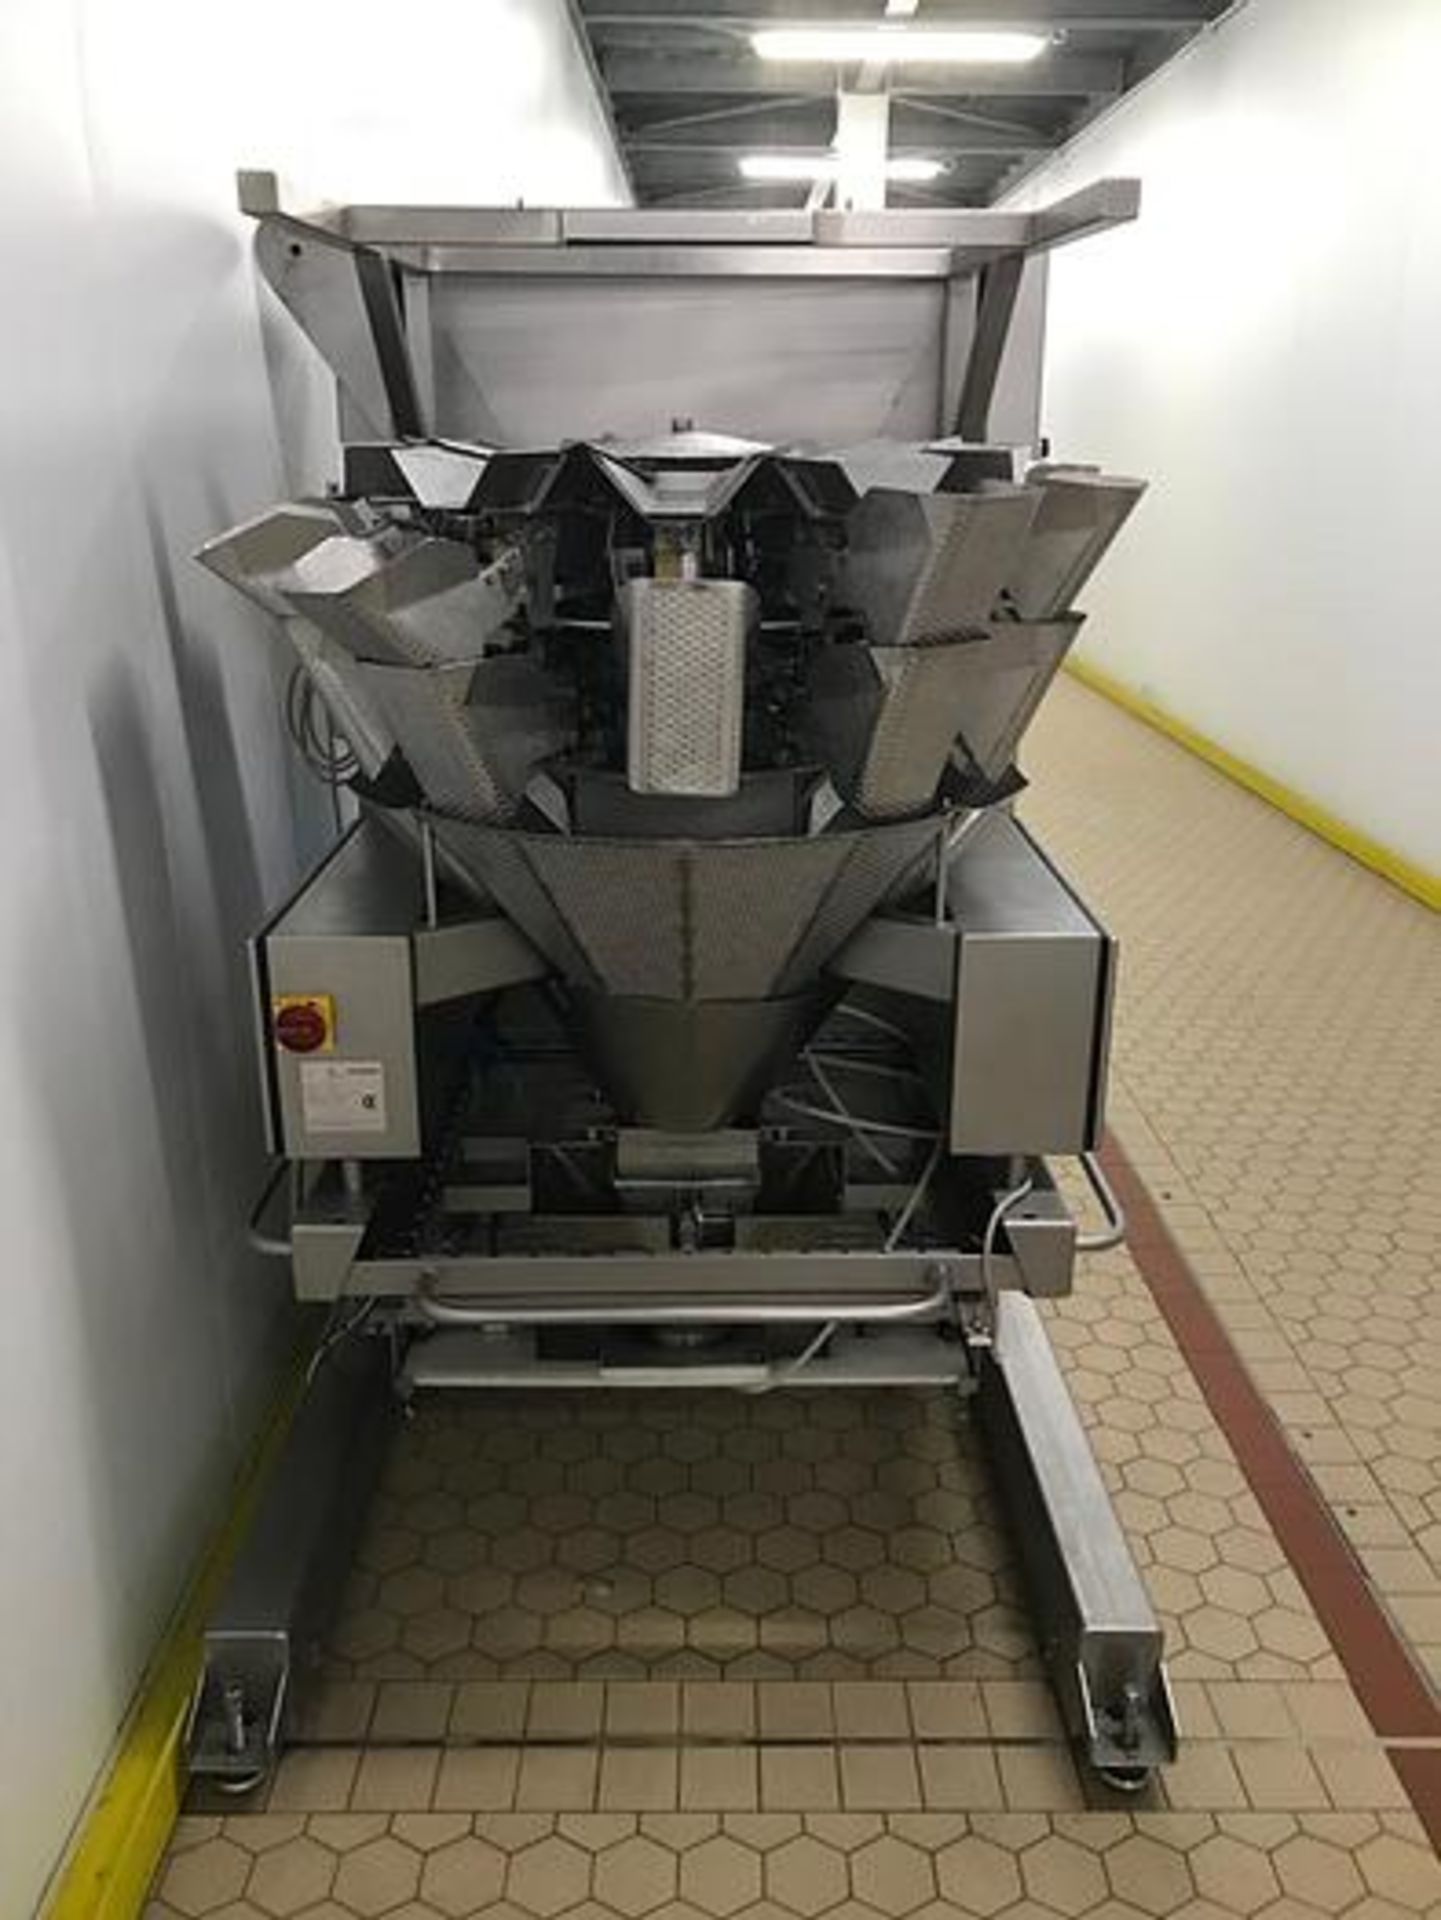 2000 BILWINCO DW60/10-D PORTABLE MULTIHEAD WEIGHER WITH ELEVATOR